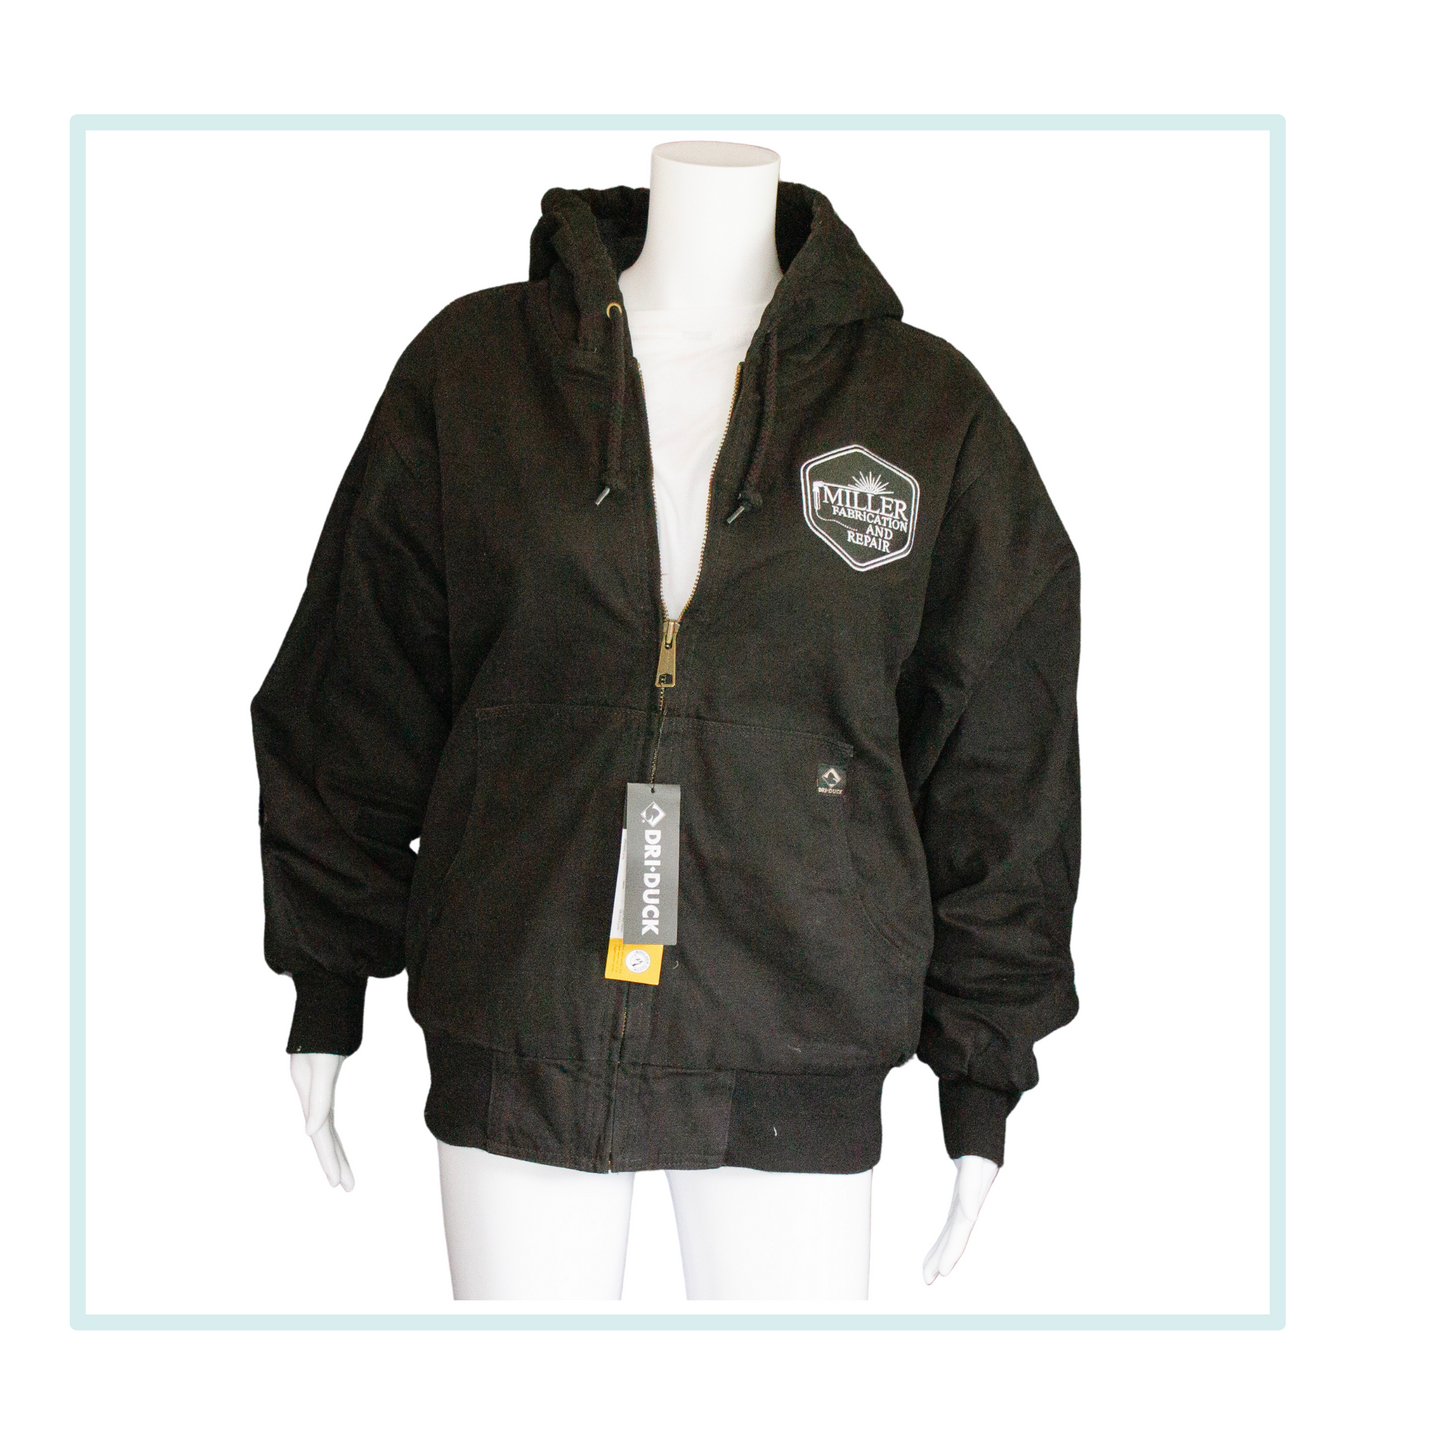 Custom Embroidered Dri Duck Jacket - front chest and full back logo